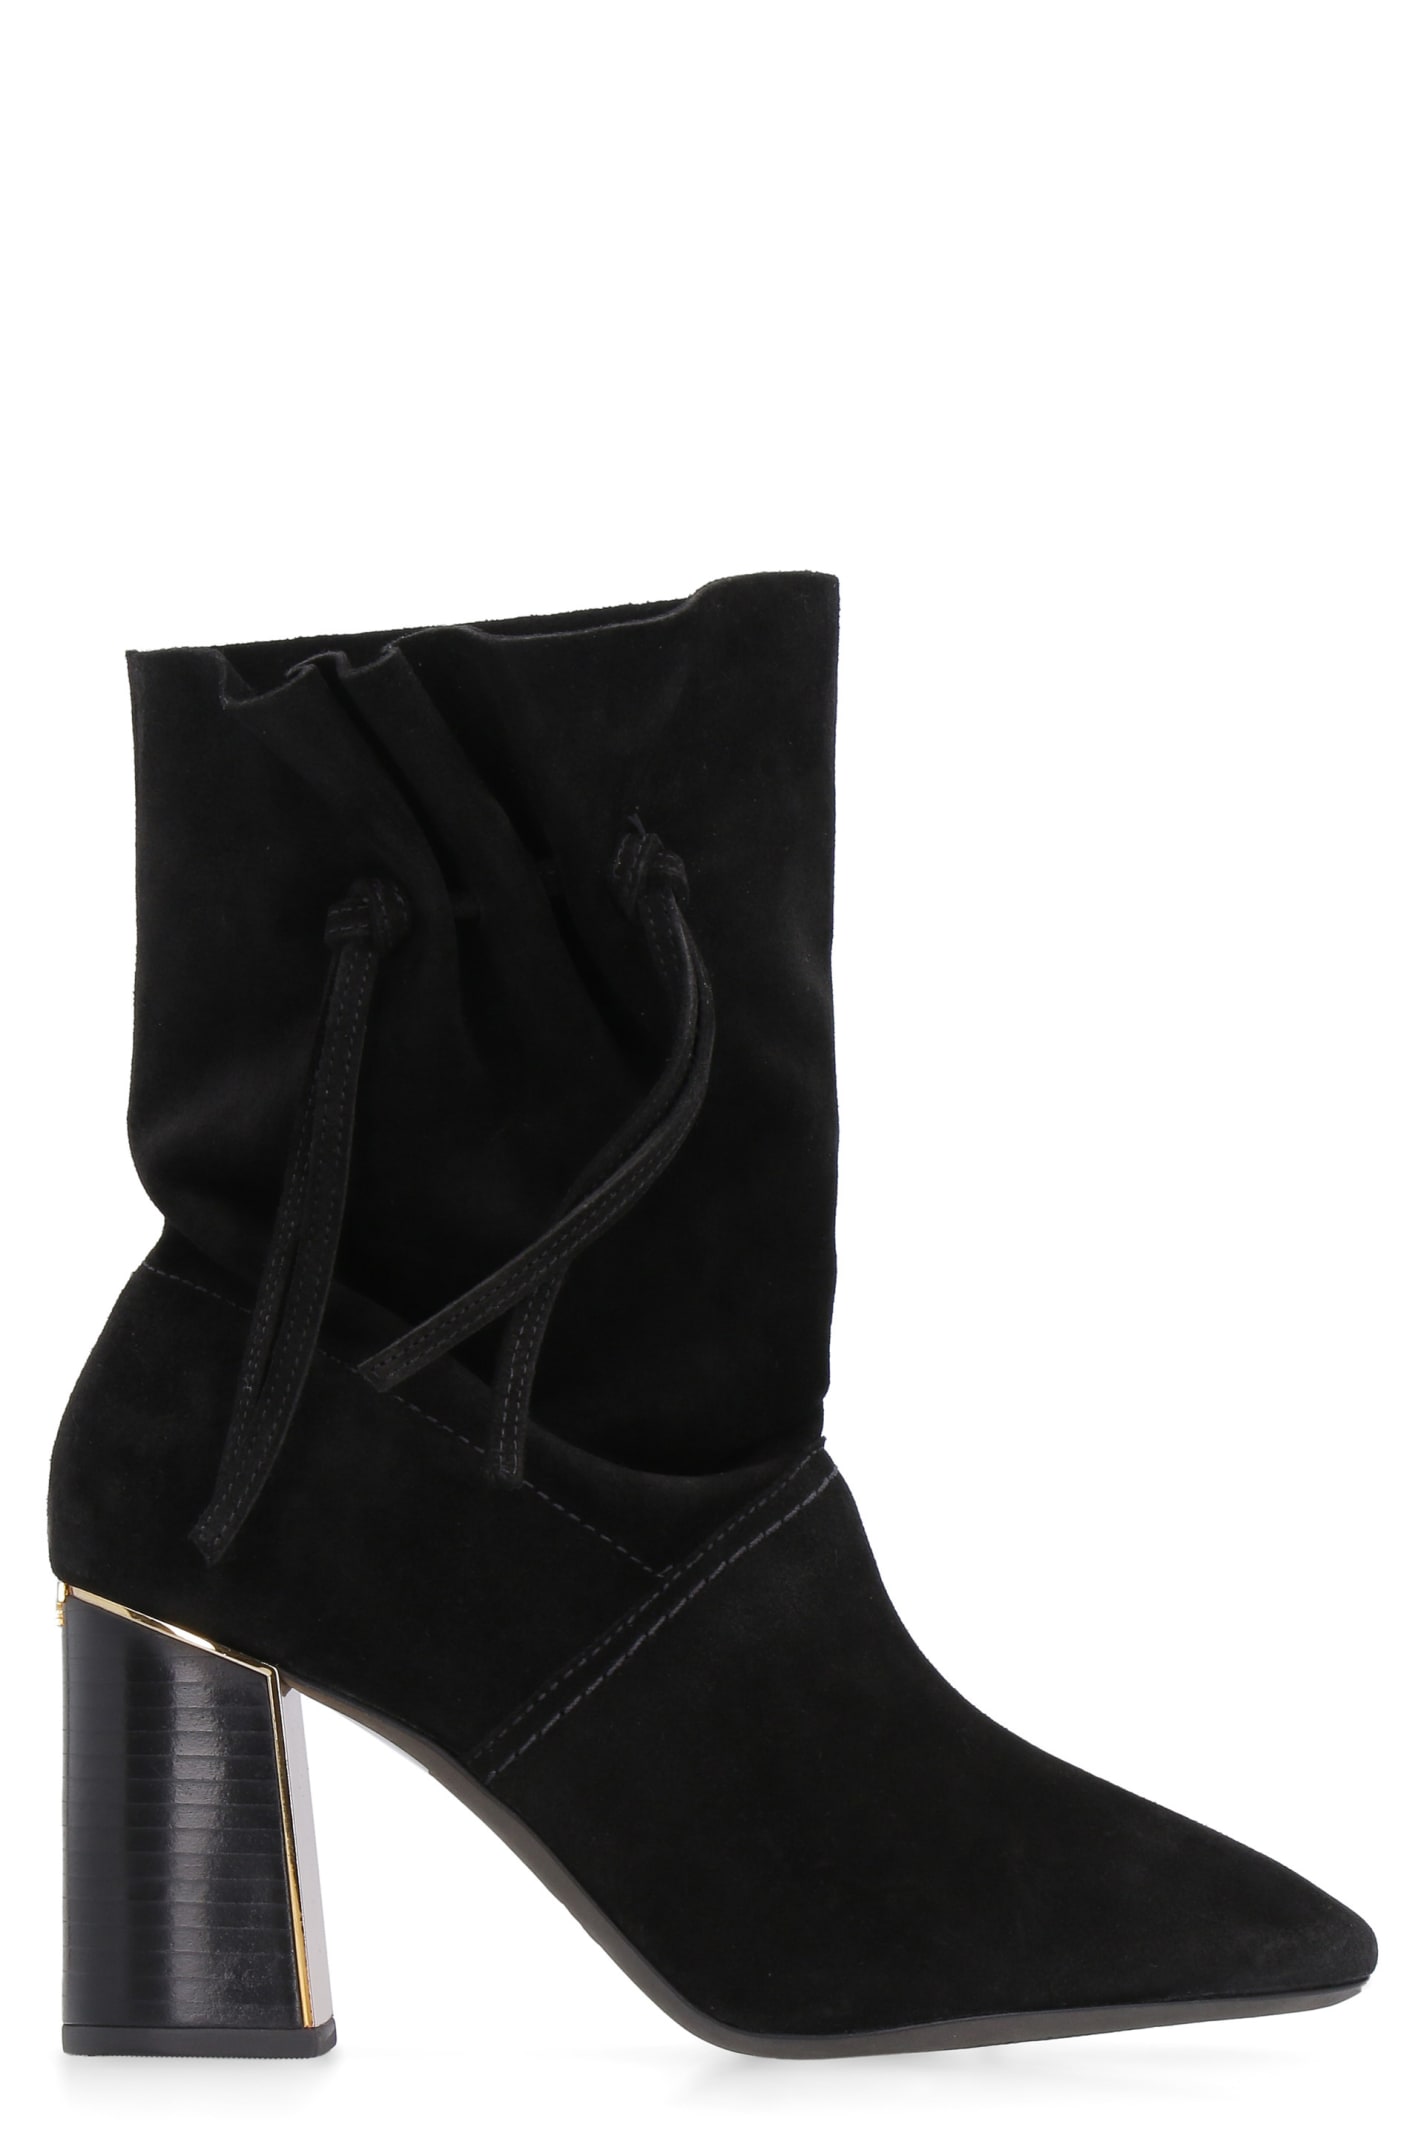 Tory Burch Gigi Suede Ankle Boots